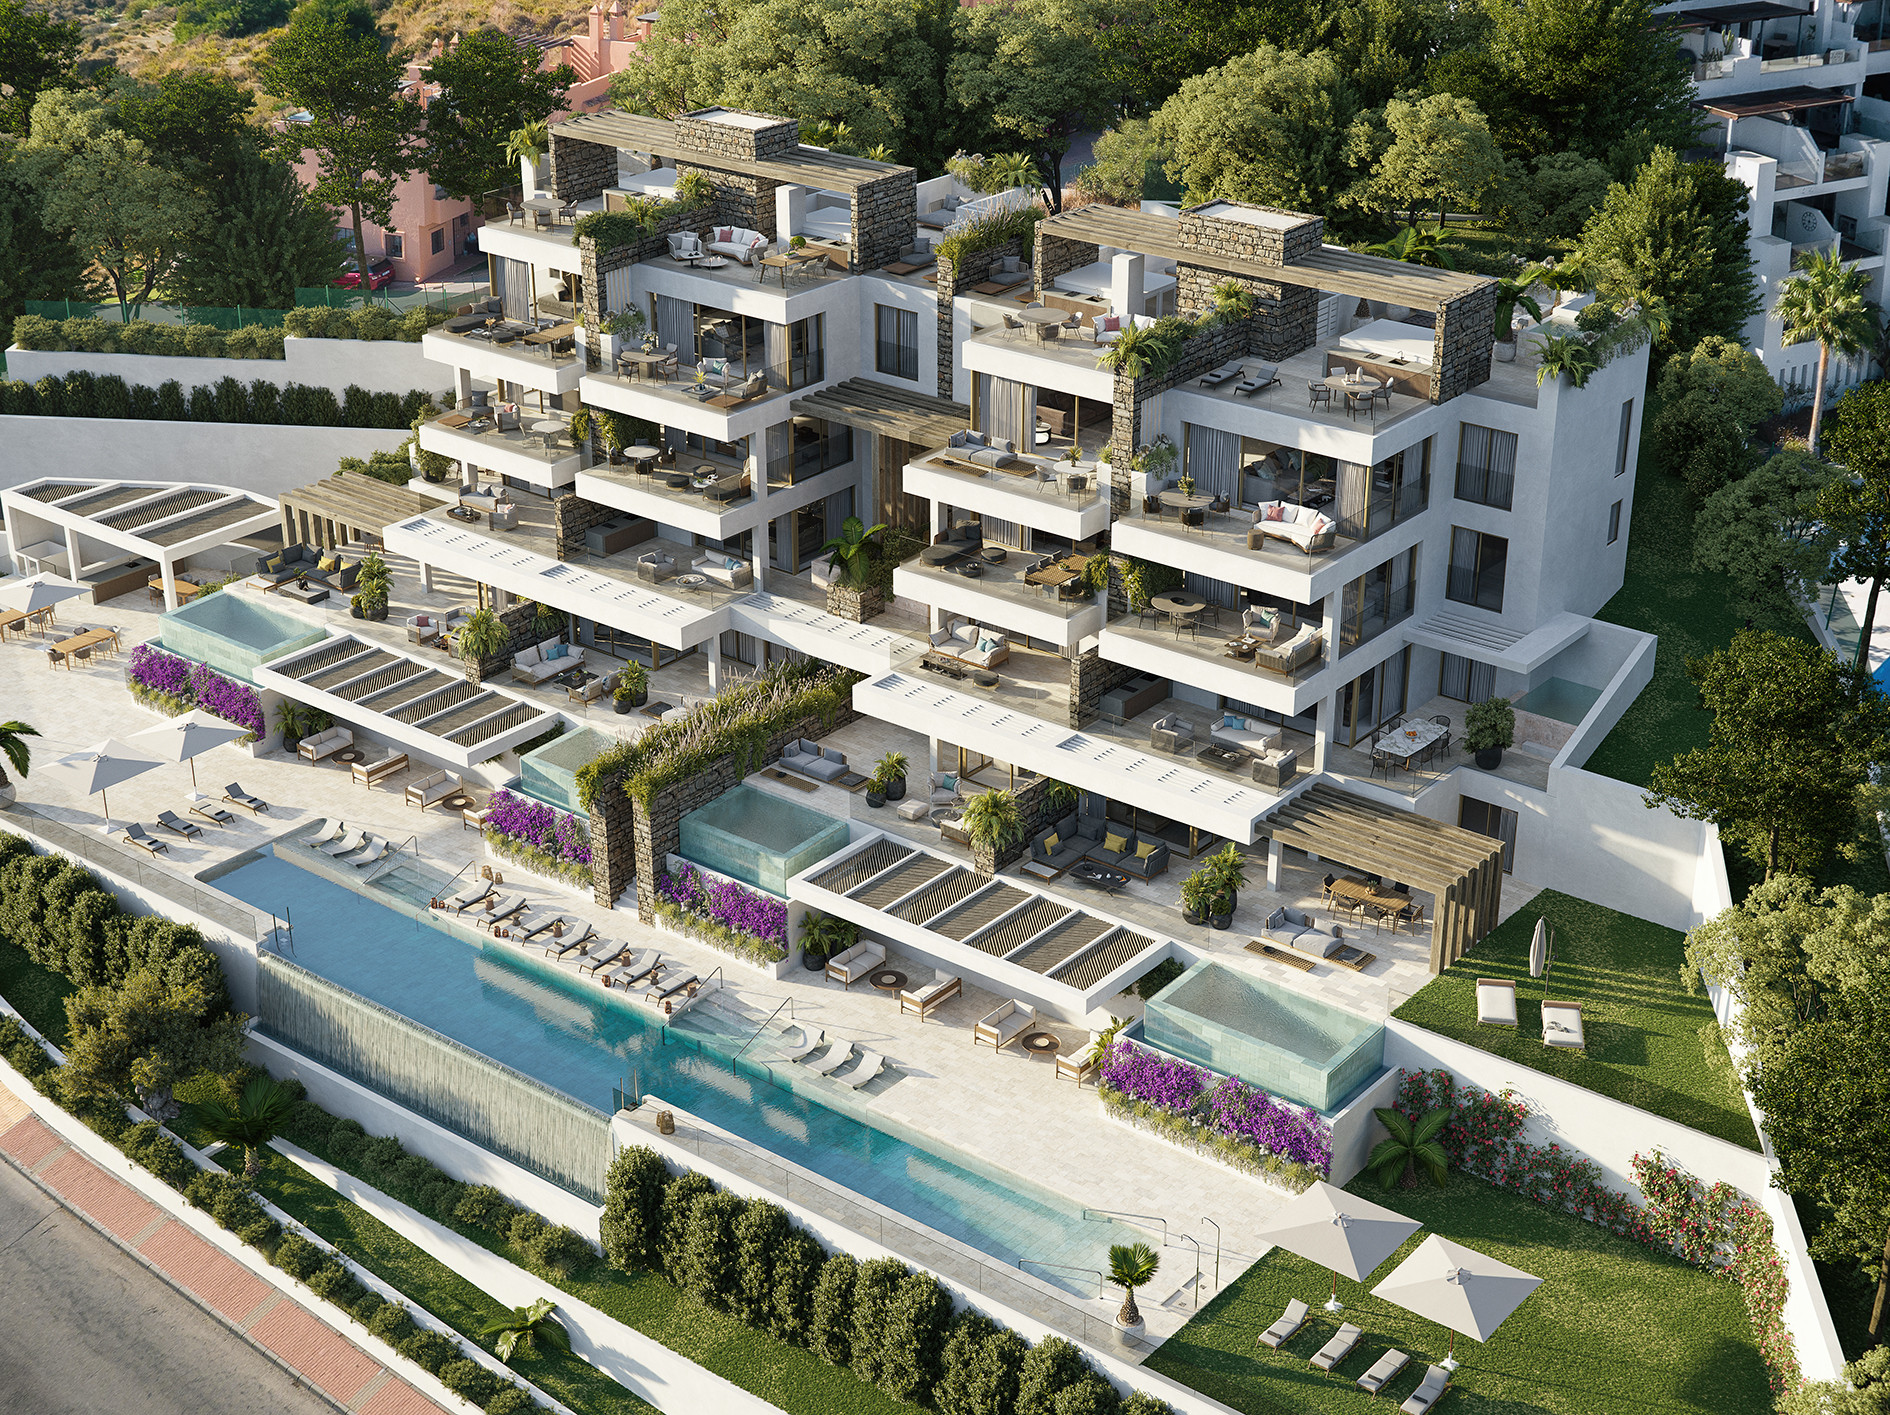 Apartment for sale in Mijas 13